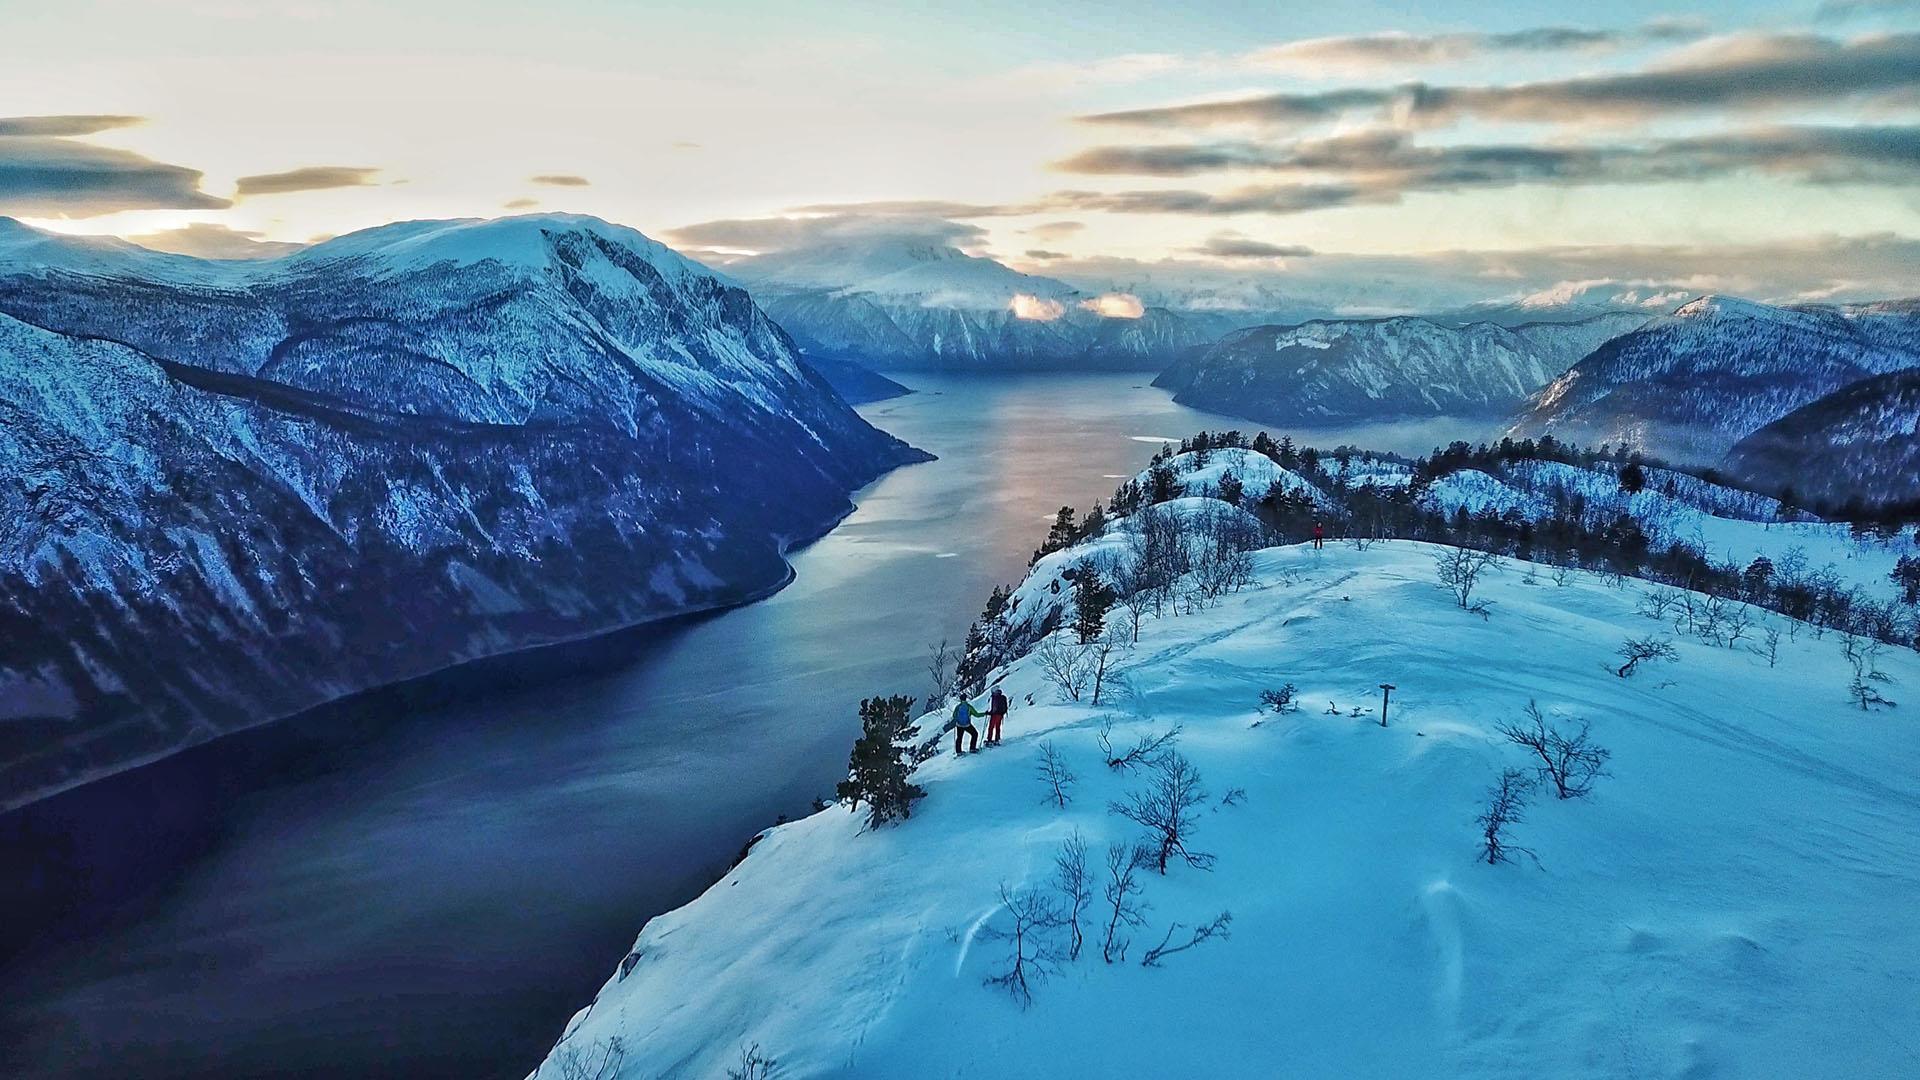 Snowshoe hikers in a snowy mountain and fjord landscape in a magical winter light.